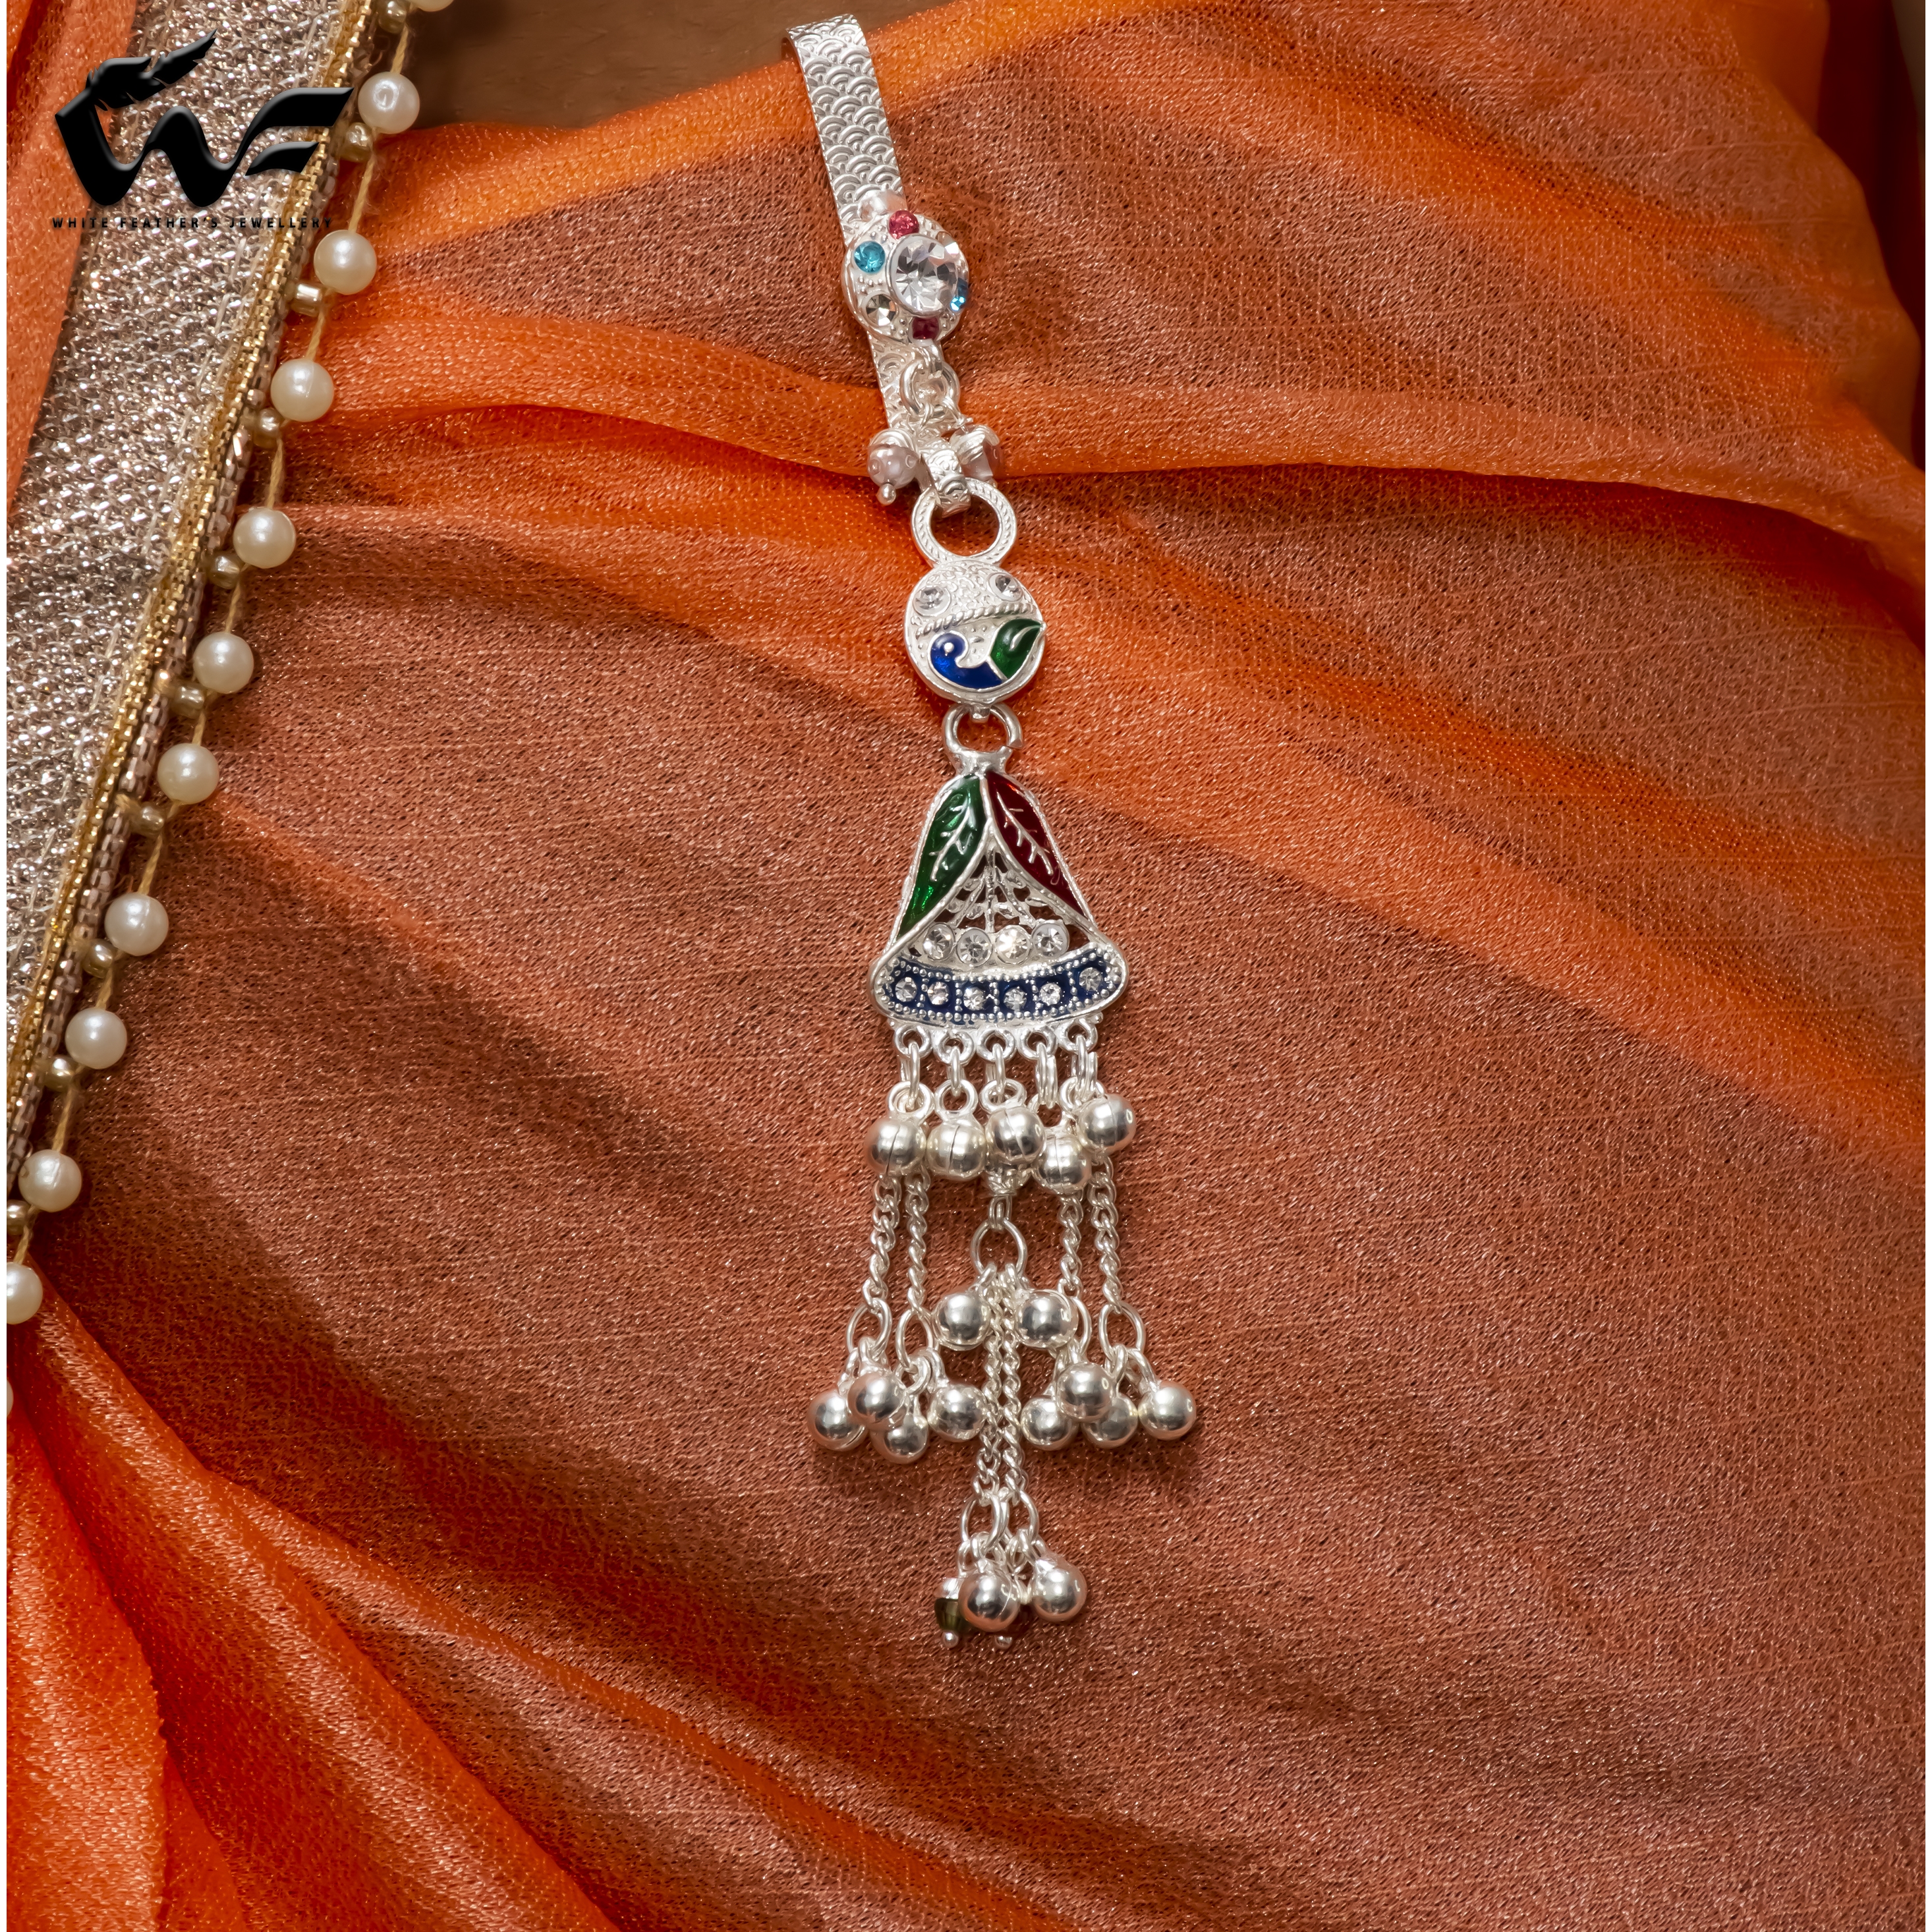 Shyle 925 Sterling Silver Satkas/Key Ring,Tattva Intricate Chitai Layered  Satka,Well Stamped with 92.5,Handcrafted Oxidized Saree Key ring, Women  Accessories, Ethnic Jewellery,Traditional Saree Pin : Amazon.in: Jewellery